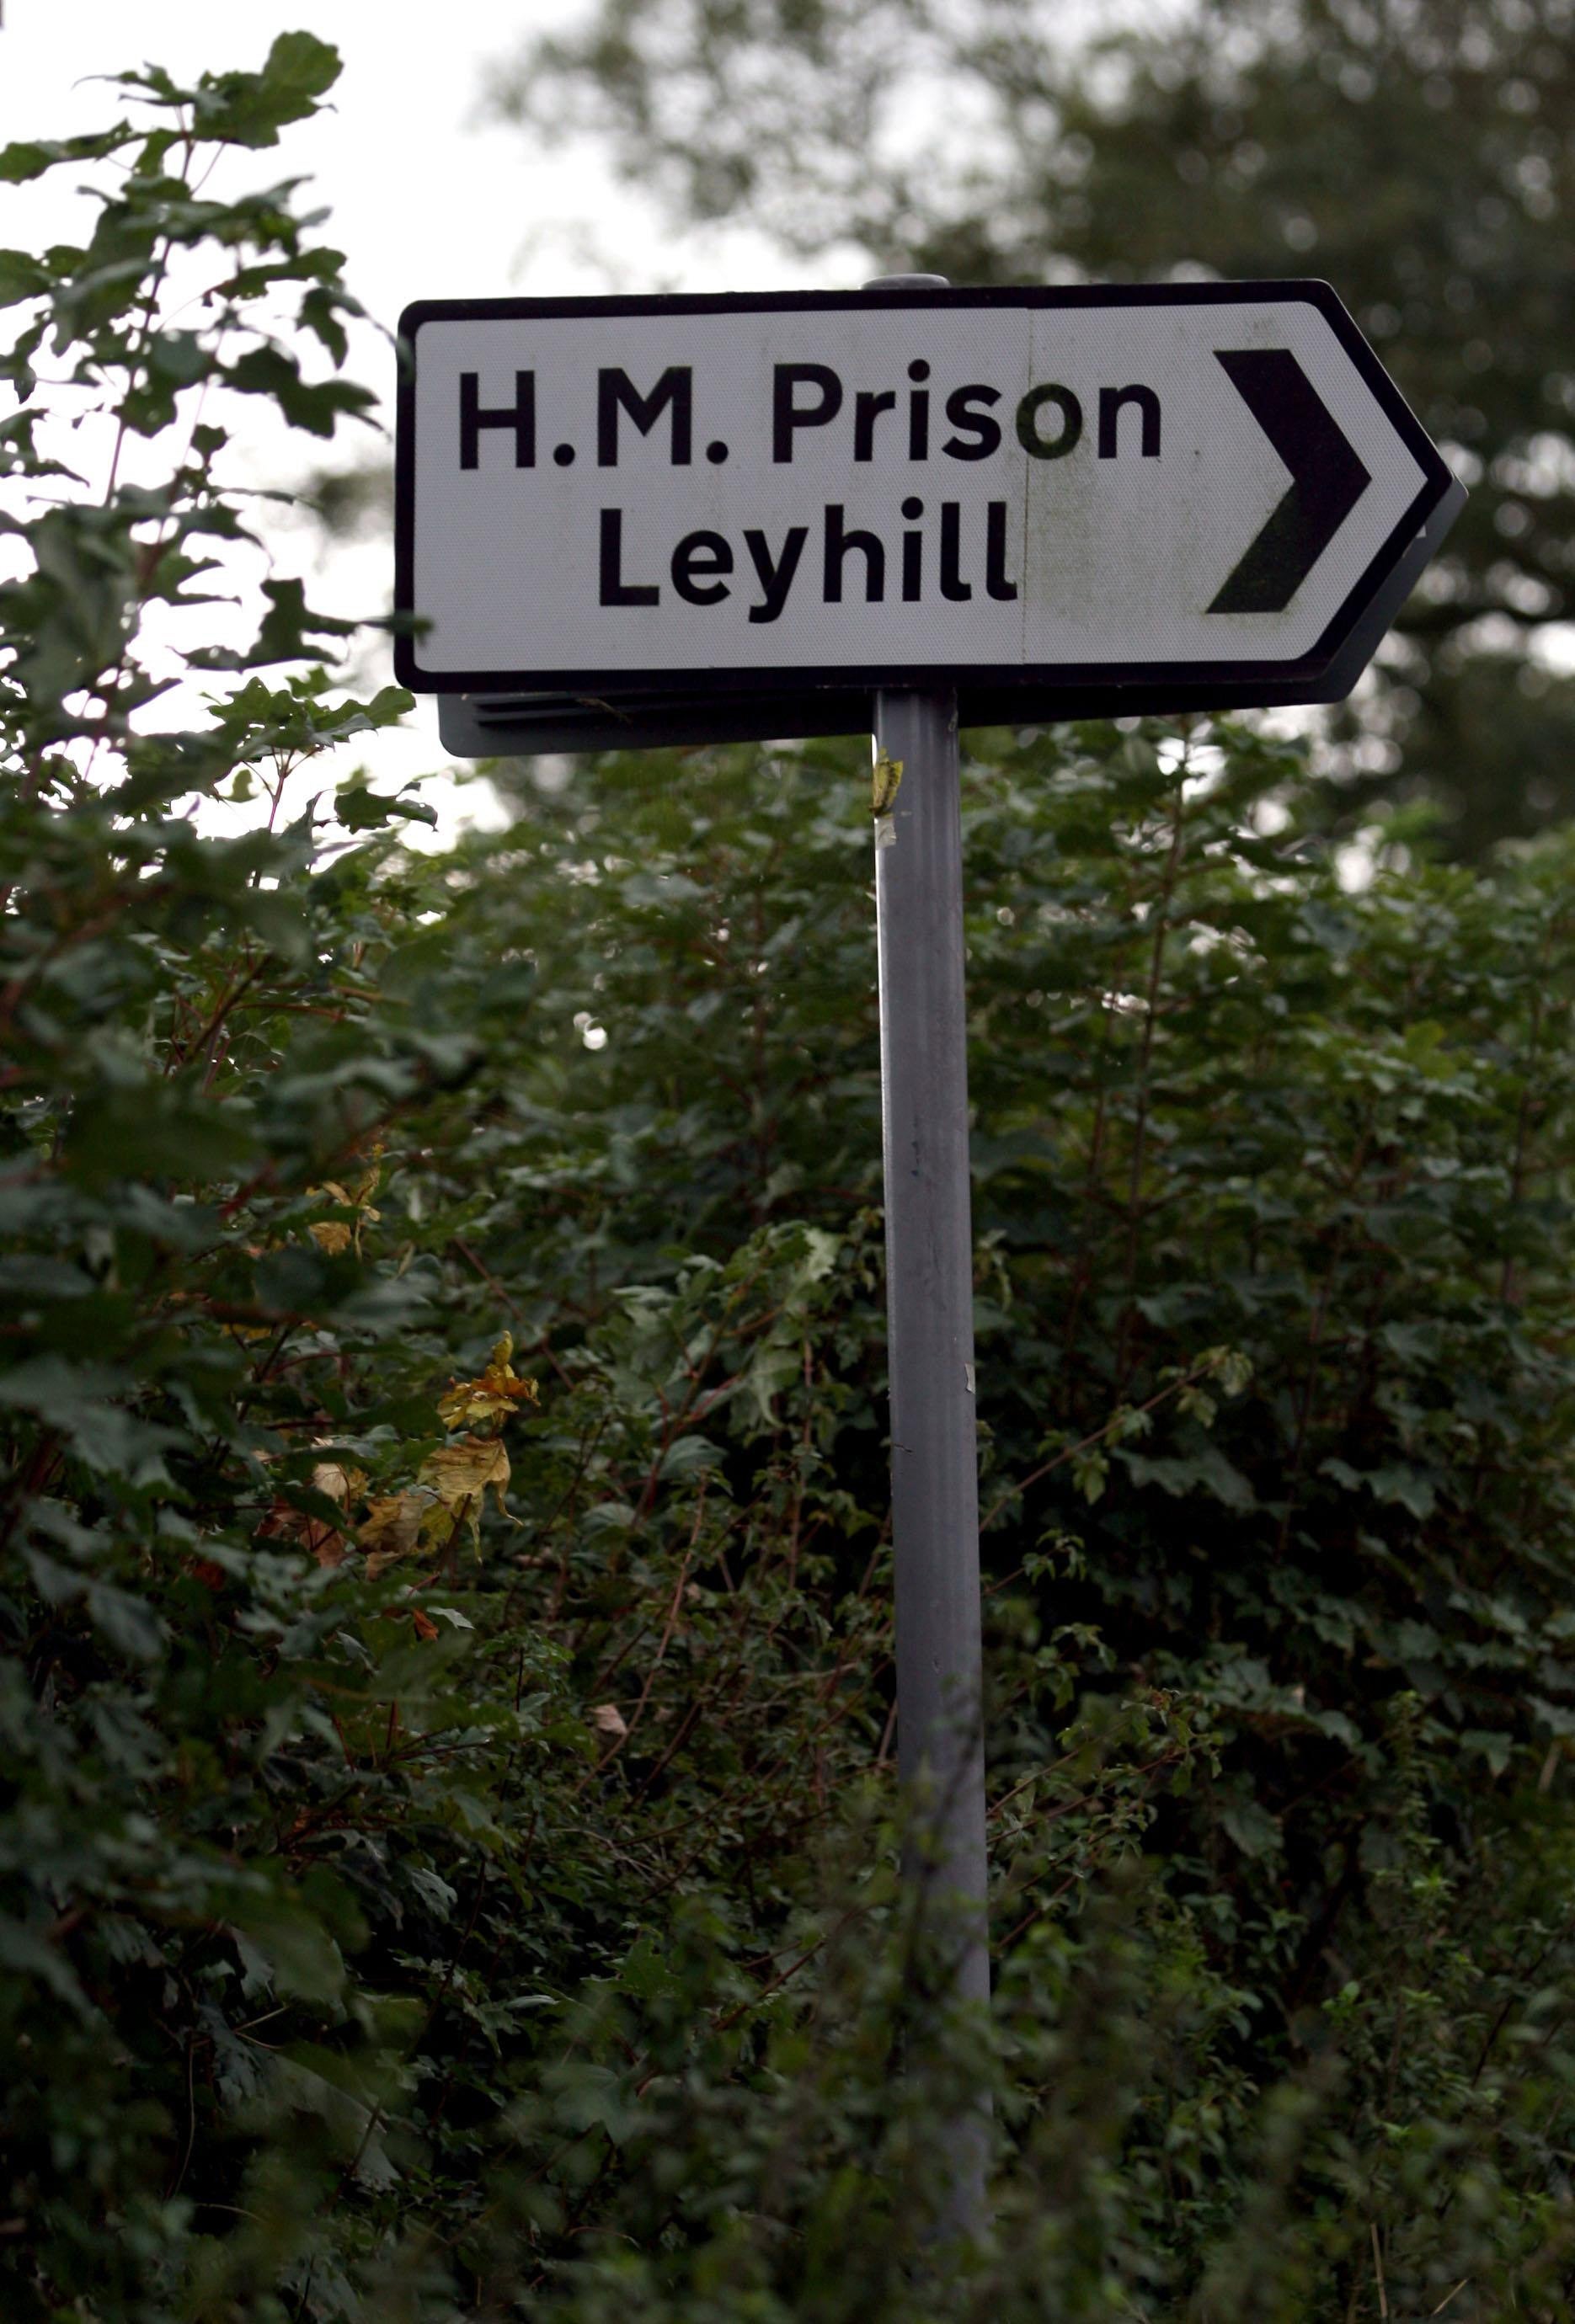 Two prisoners are on the run after escaping Leyhill Prison near Wotton-under-Edge, Gloucestershire, South West England (Anthony Devlin/PA)